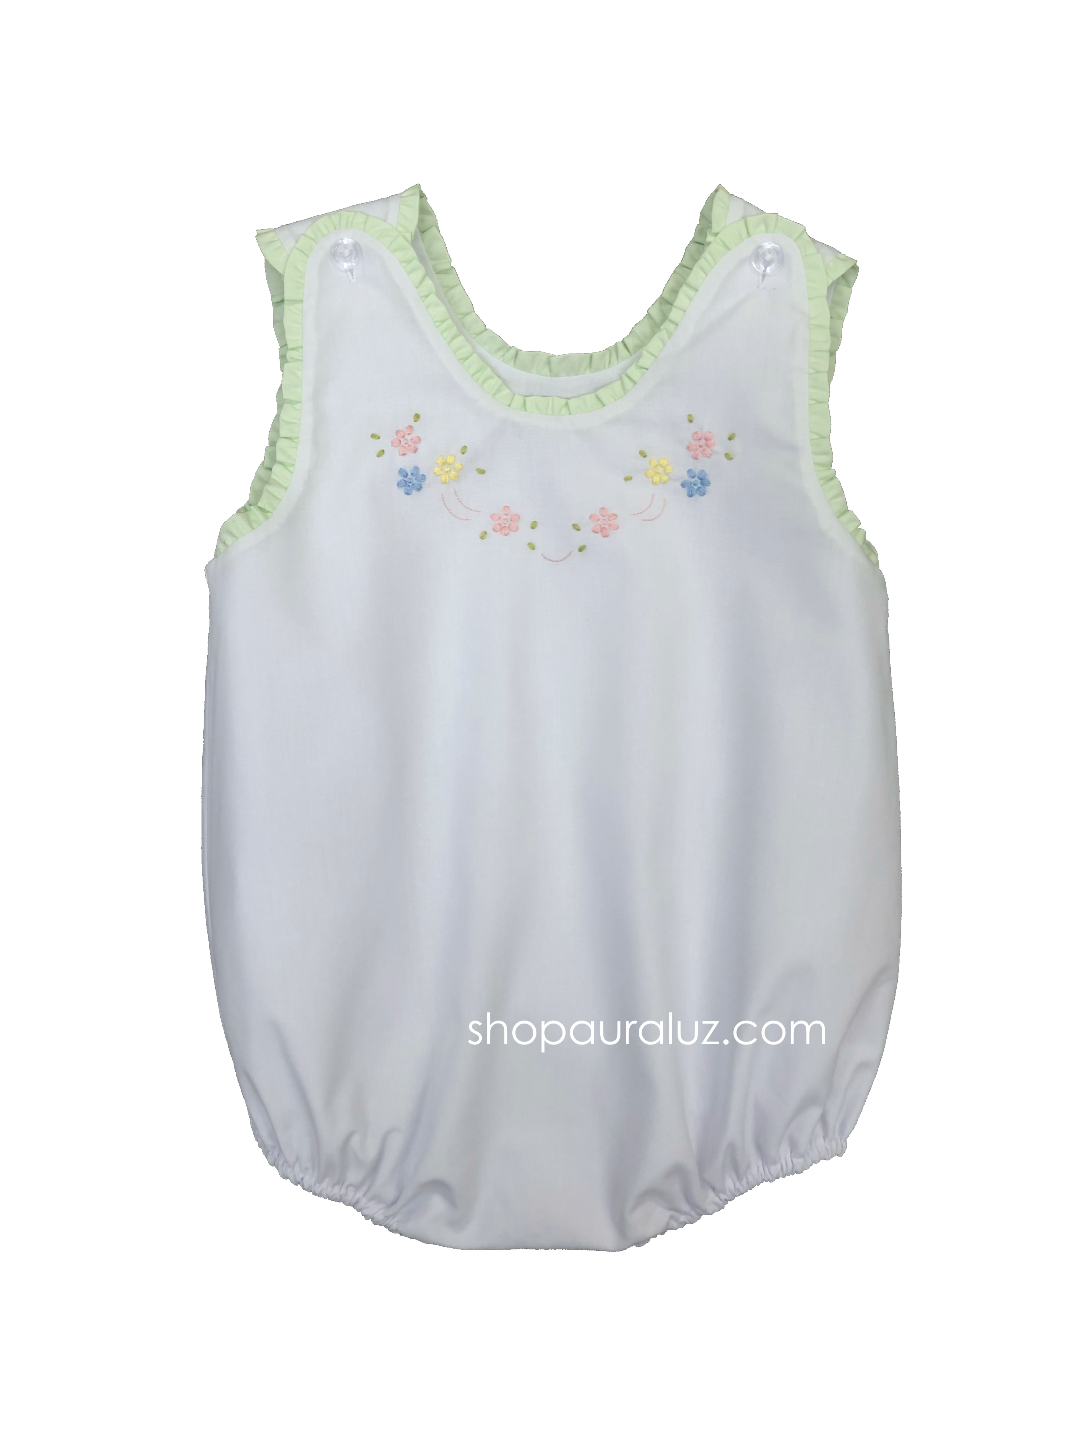 Auraluz Sleeveless Bubble..White with green ruffle trim and embroidered flowers